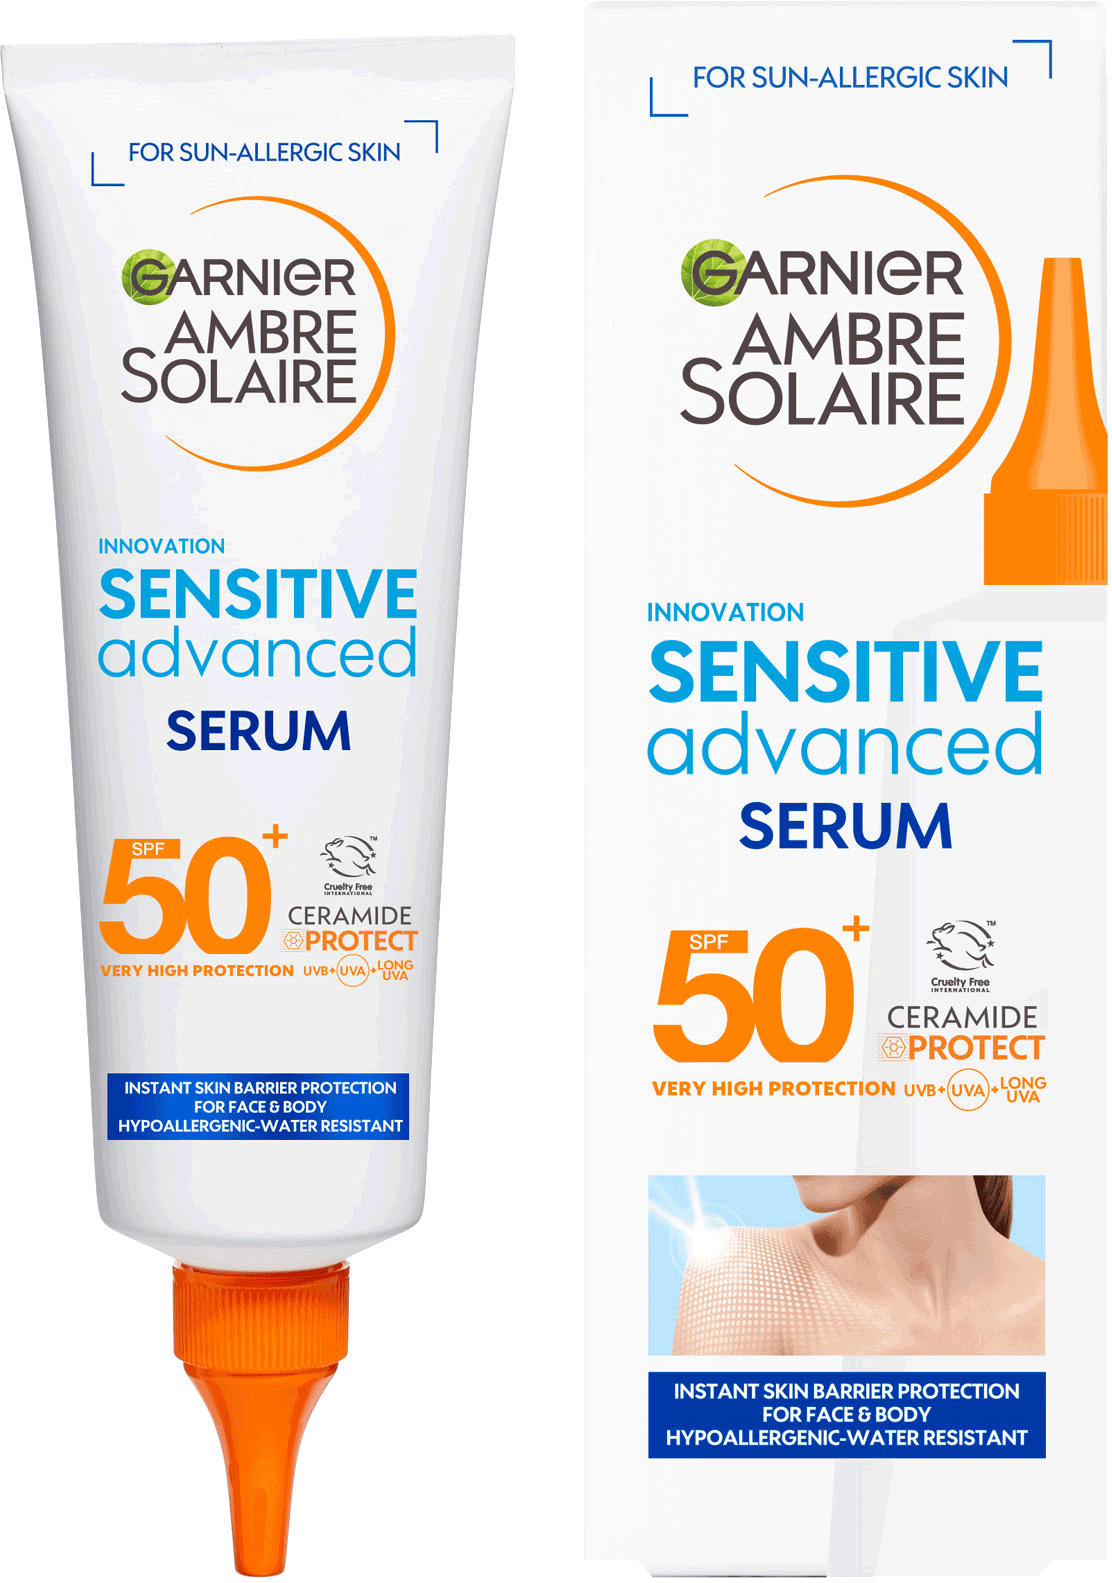 Ambre Solaire Sensitive Advamced Serum for Face and Body